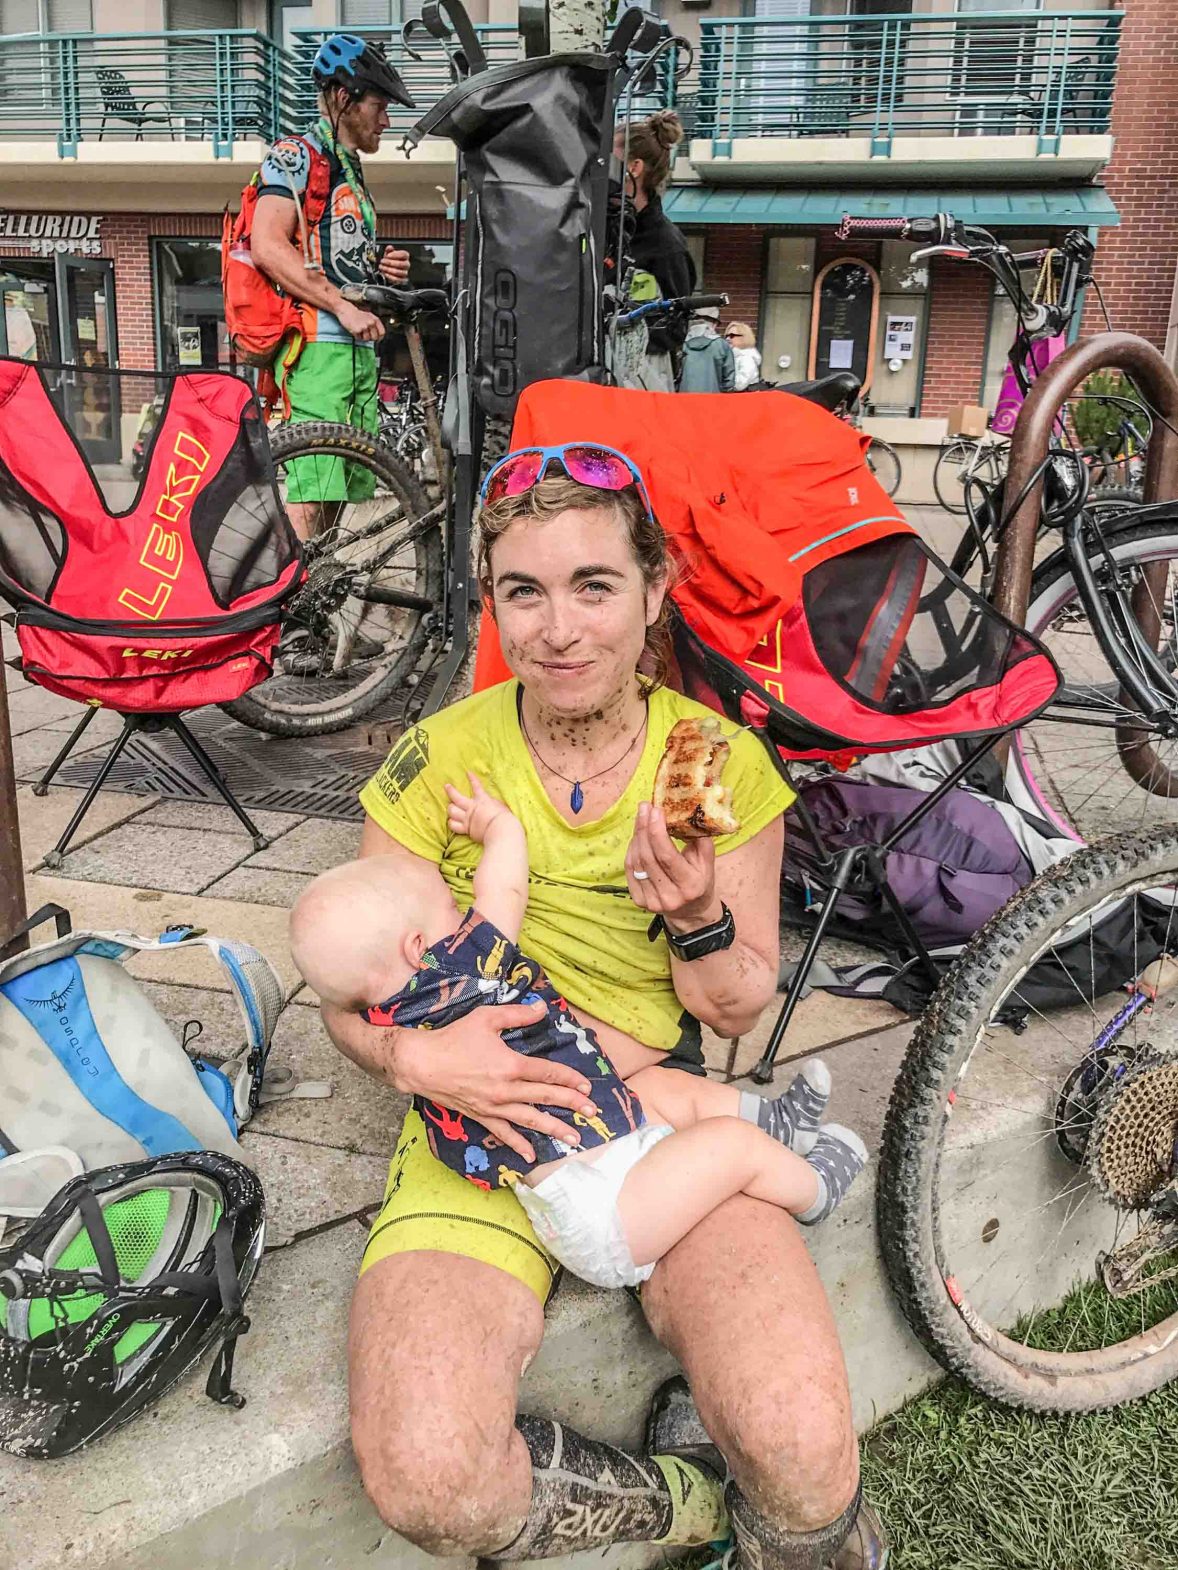 Chelsey Magness breastfeeding her baby having just completed a very dirty ride.